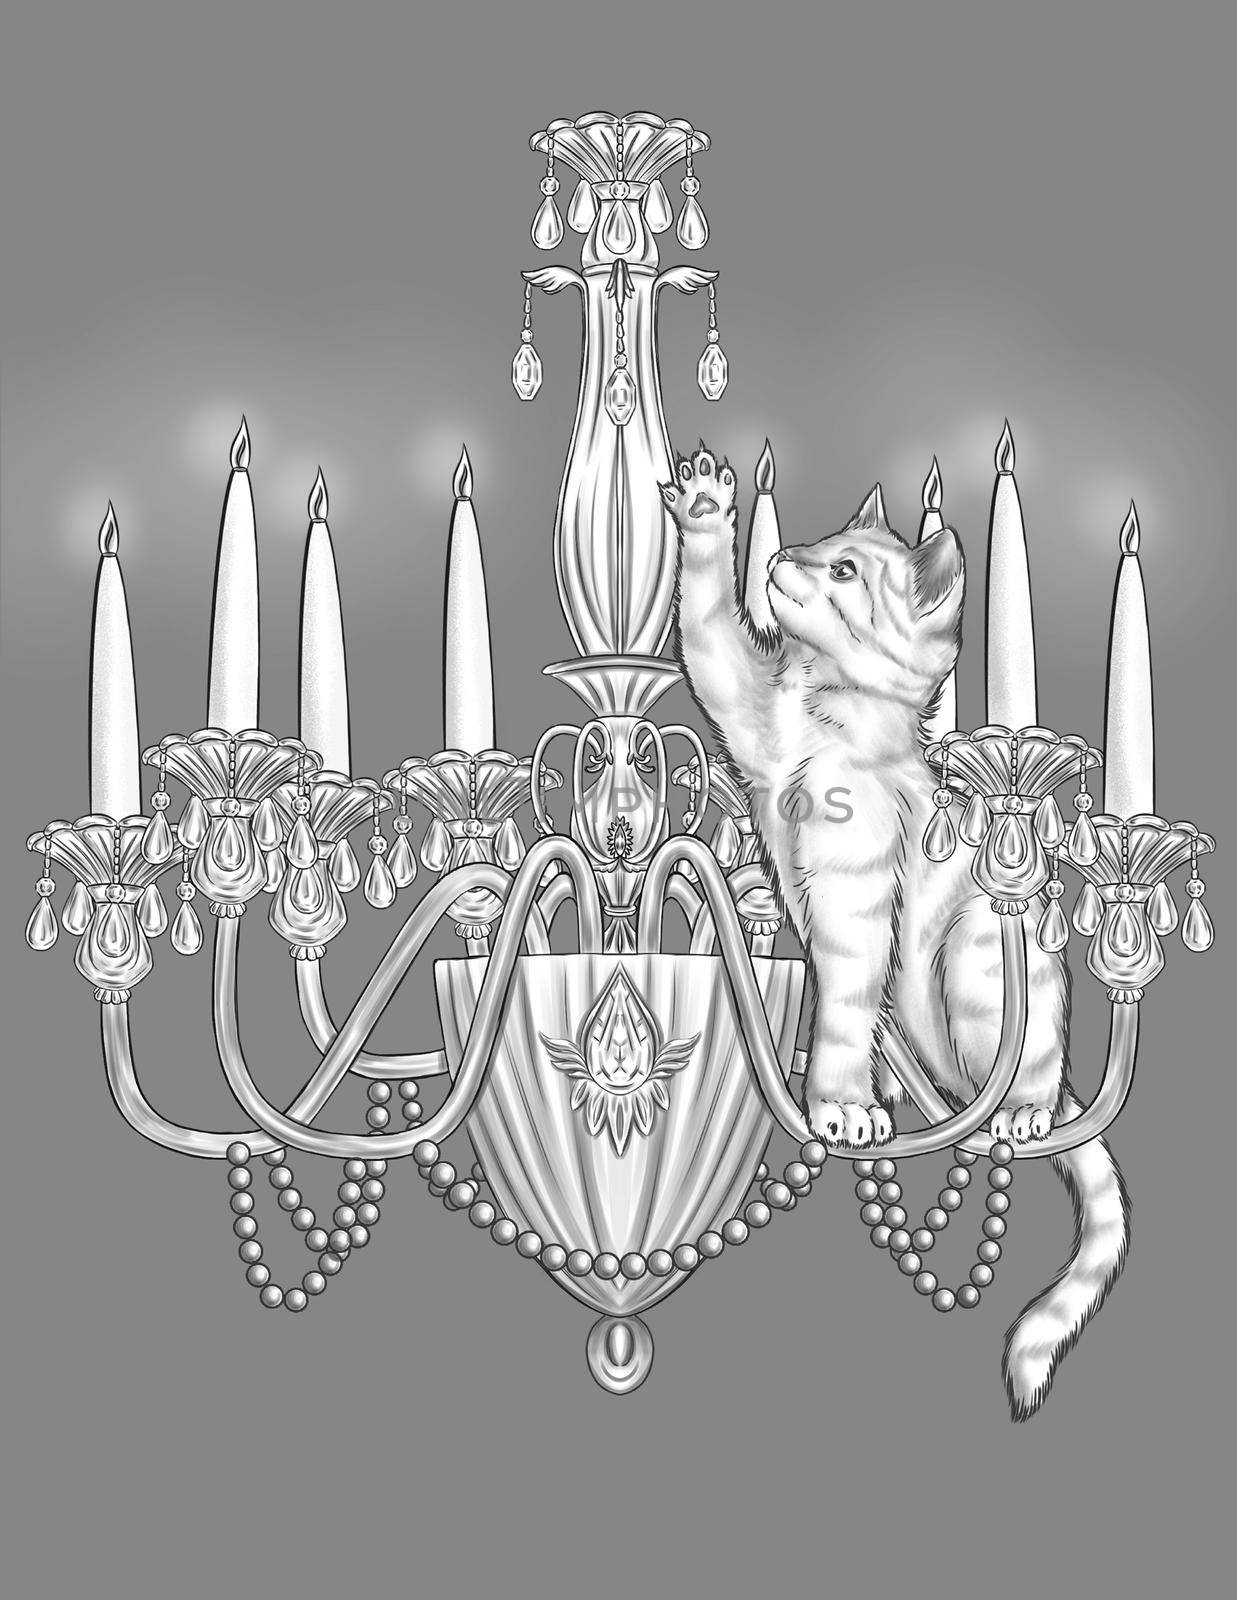 Playful Cat On Top Of A Lit Candle Chandelier Raising Paw Colorless Line Drawing. Small Feline Hanging On Ceiling Light Coloring Book Page. by nialowwa